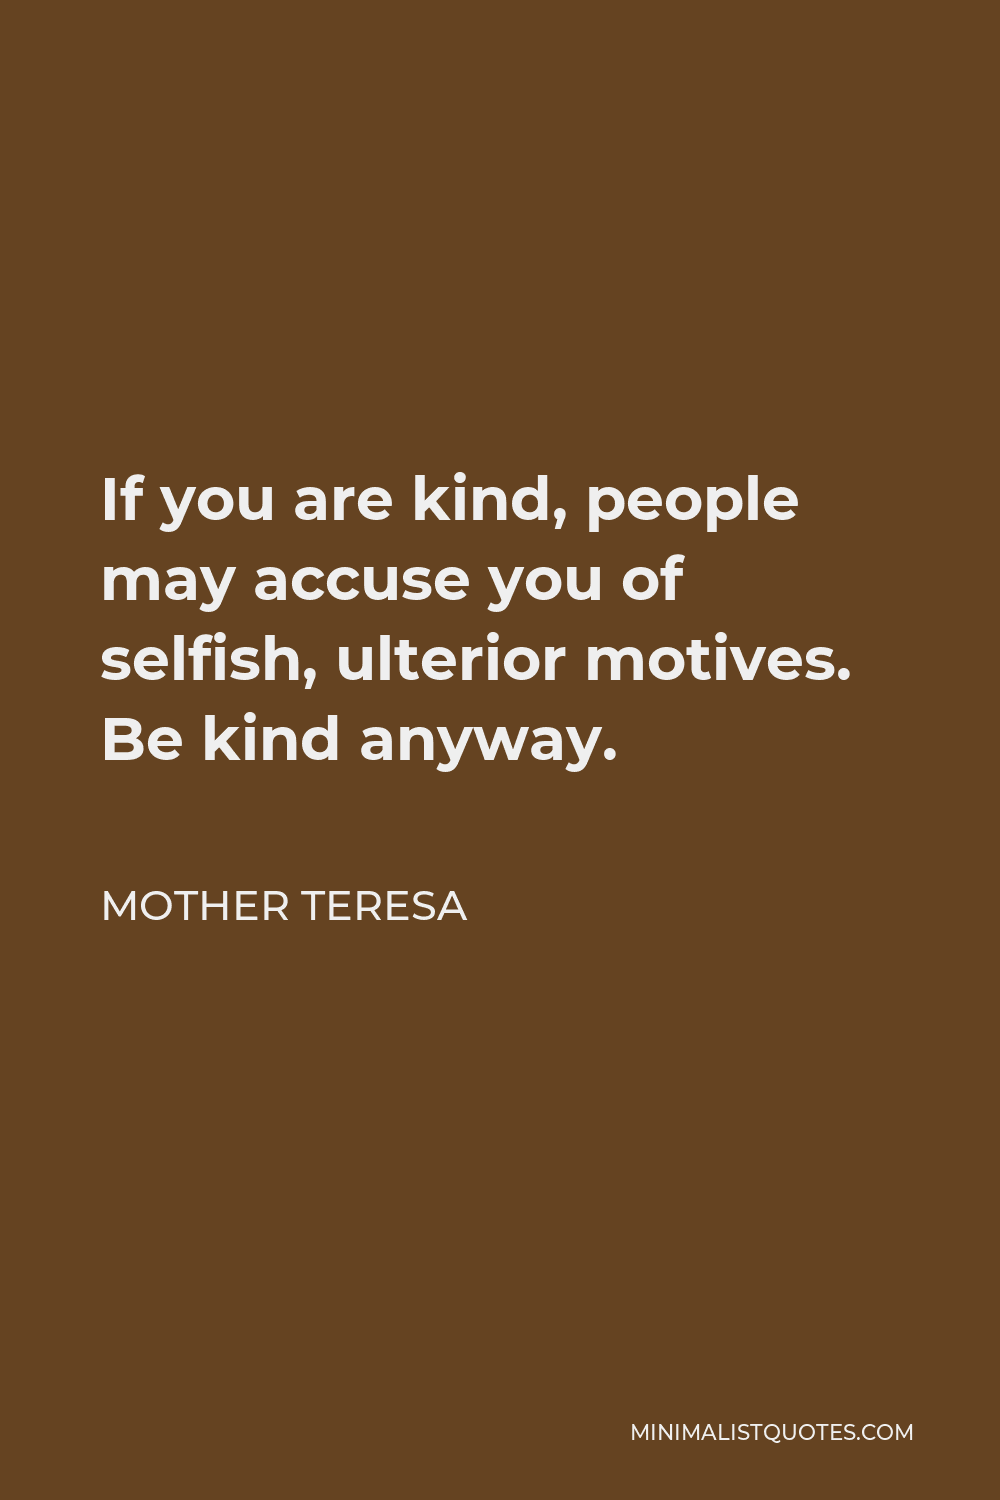 Mother Teresa Quote - If you are kind, people may accuse you of selfish, ulterior motives. Be kind anyway.